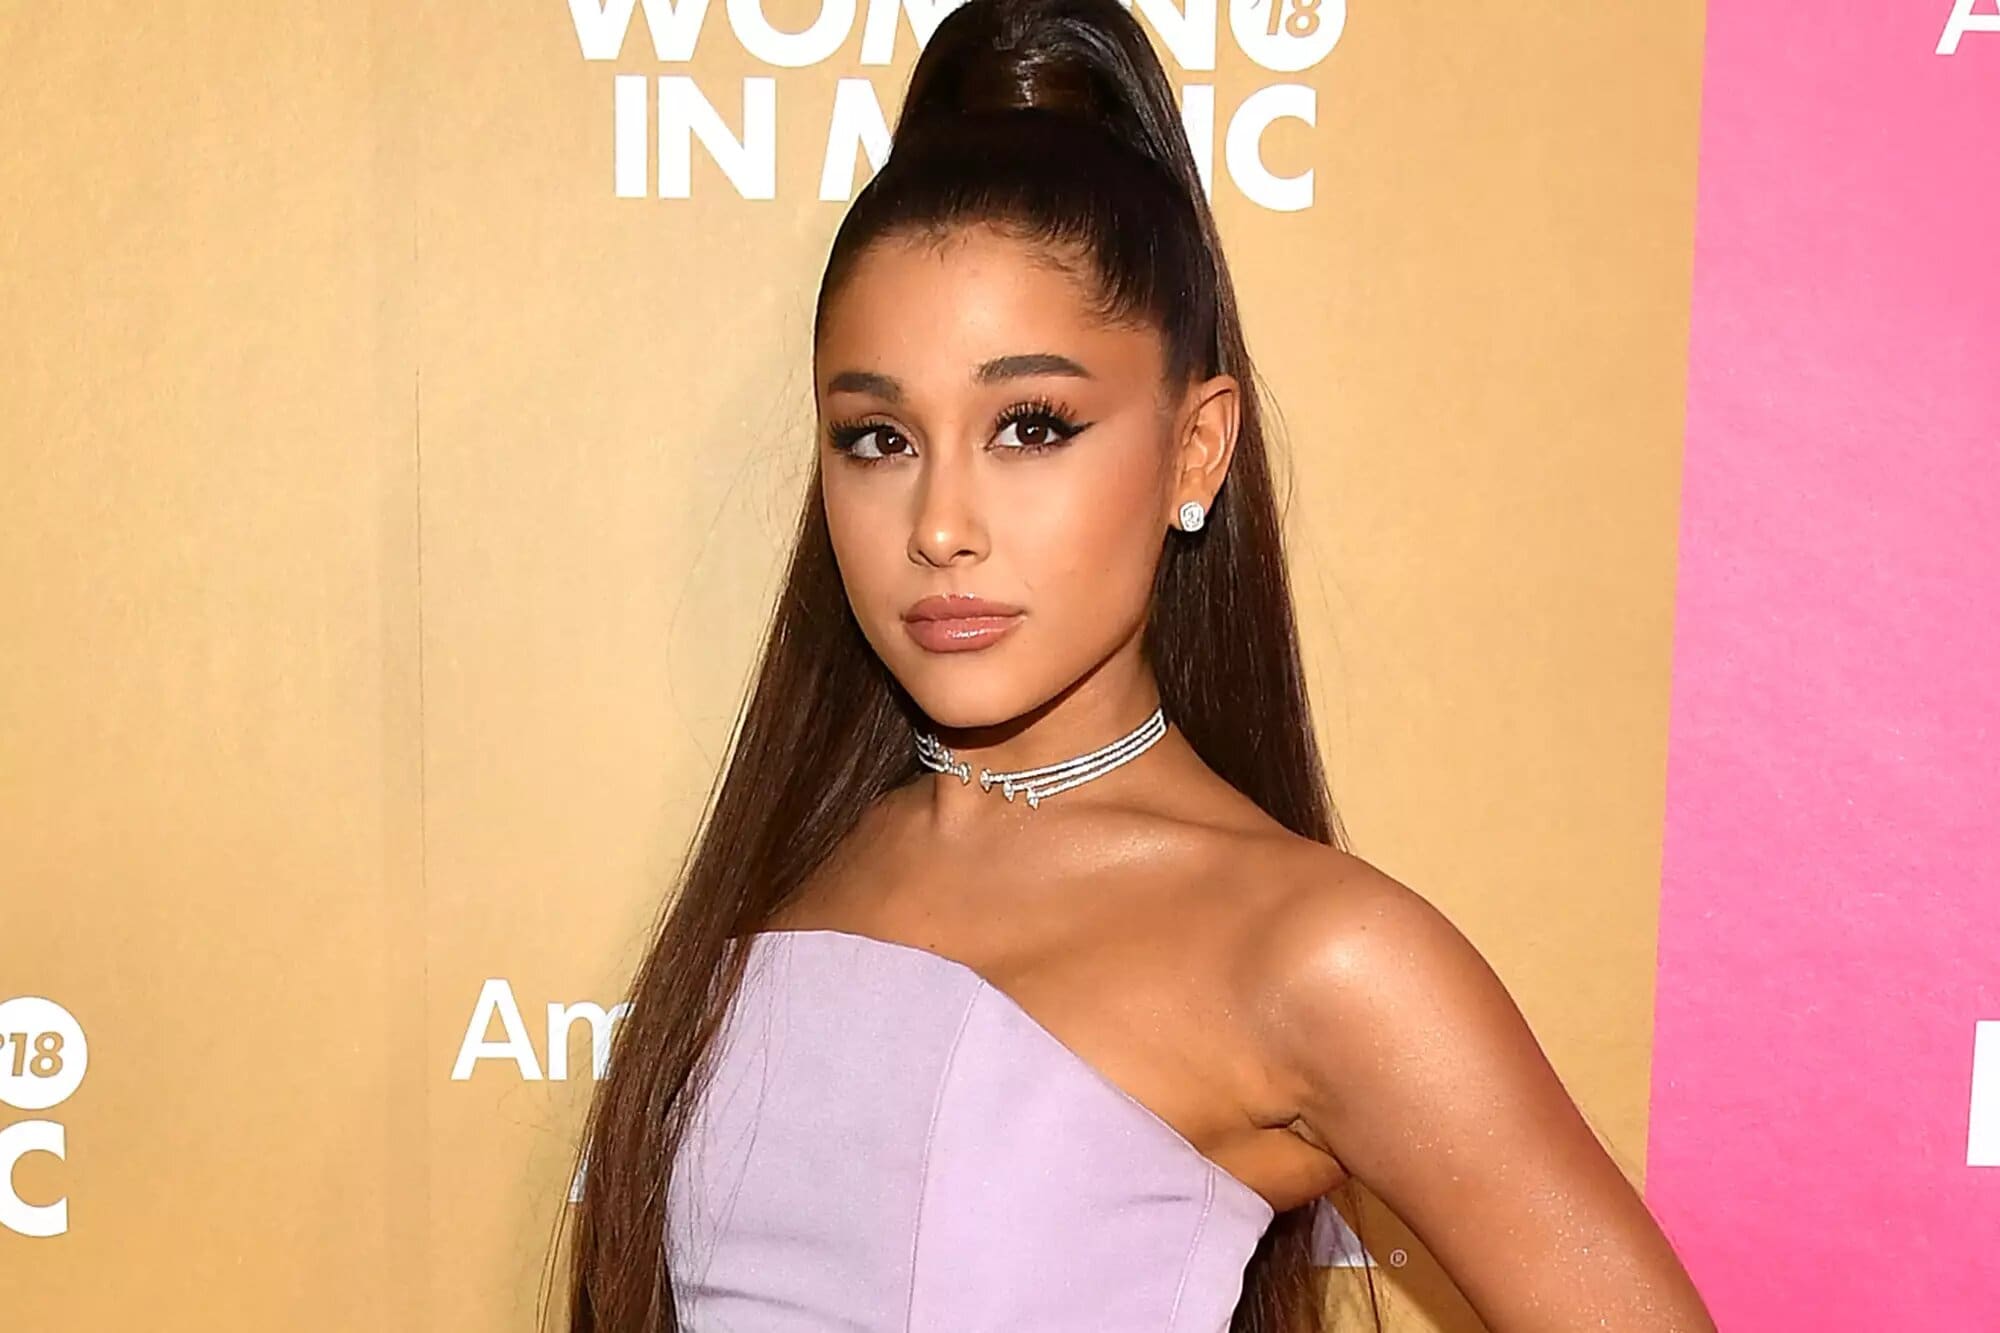 Ariana Grande Shows Before And After Pictures While Promoting Her R.E.M Beauty Line On Instagram Stories